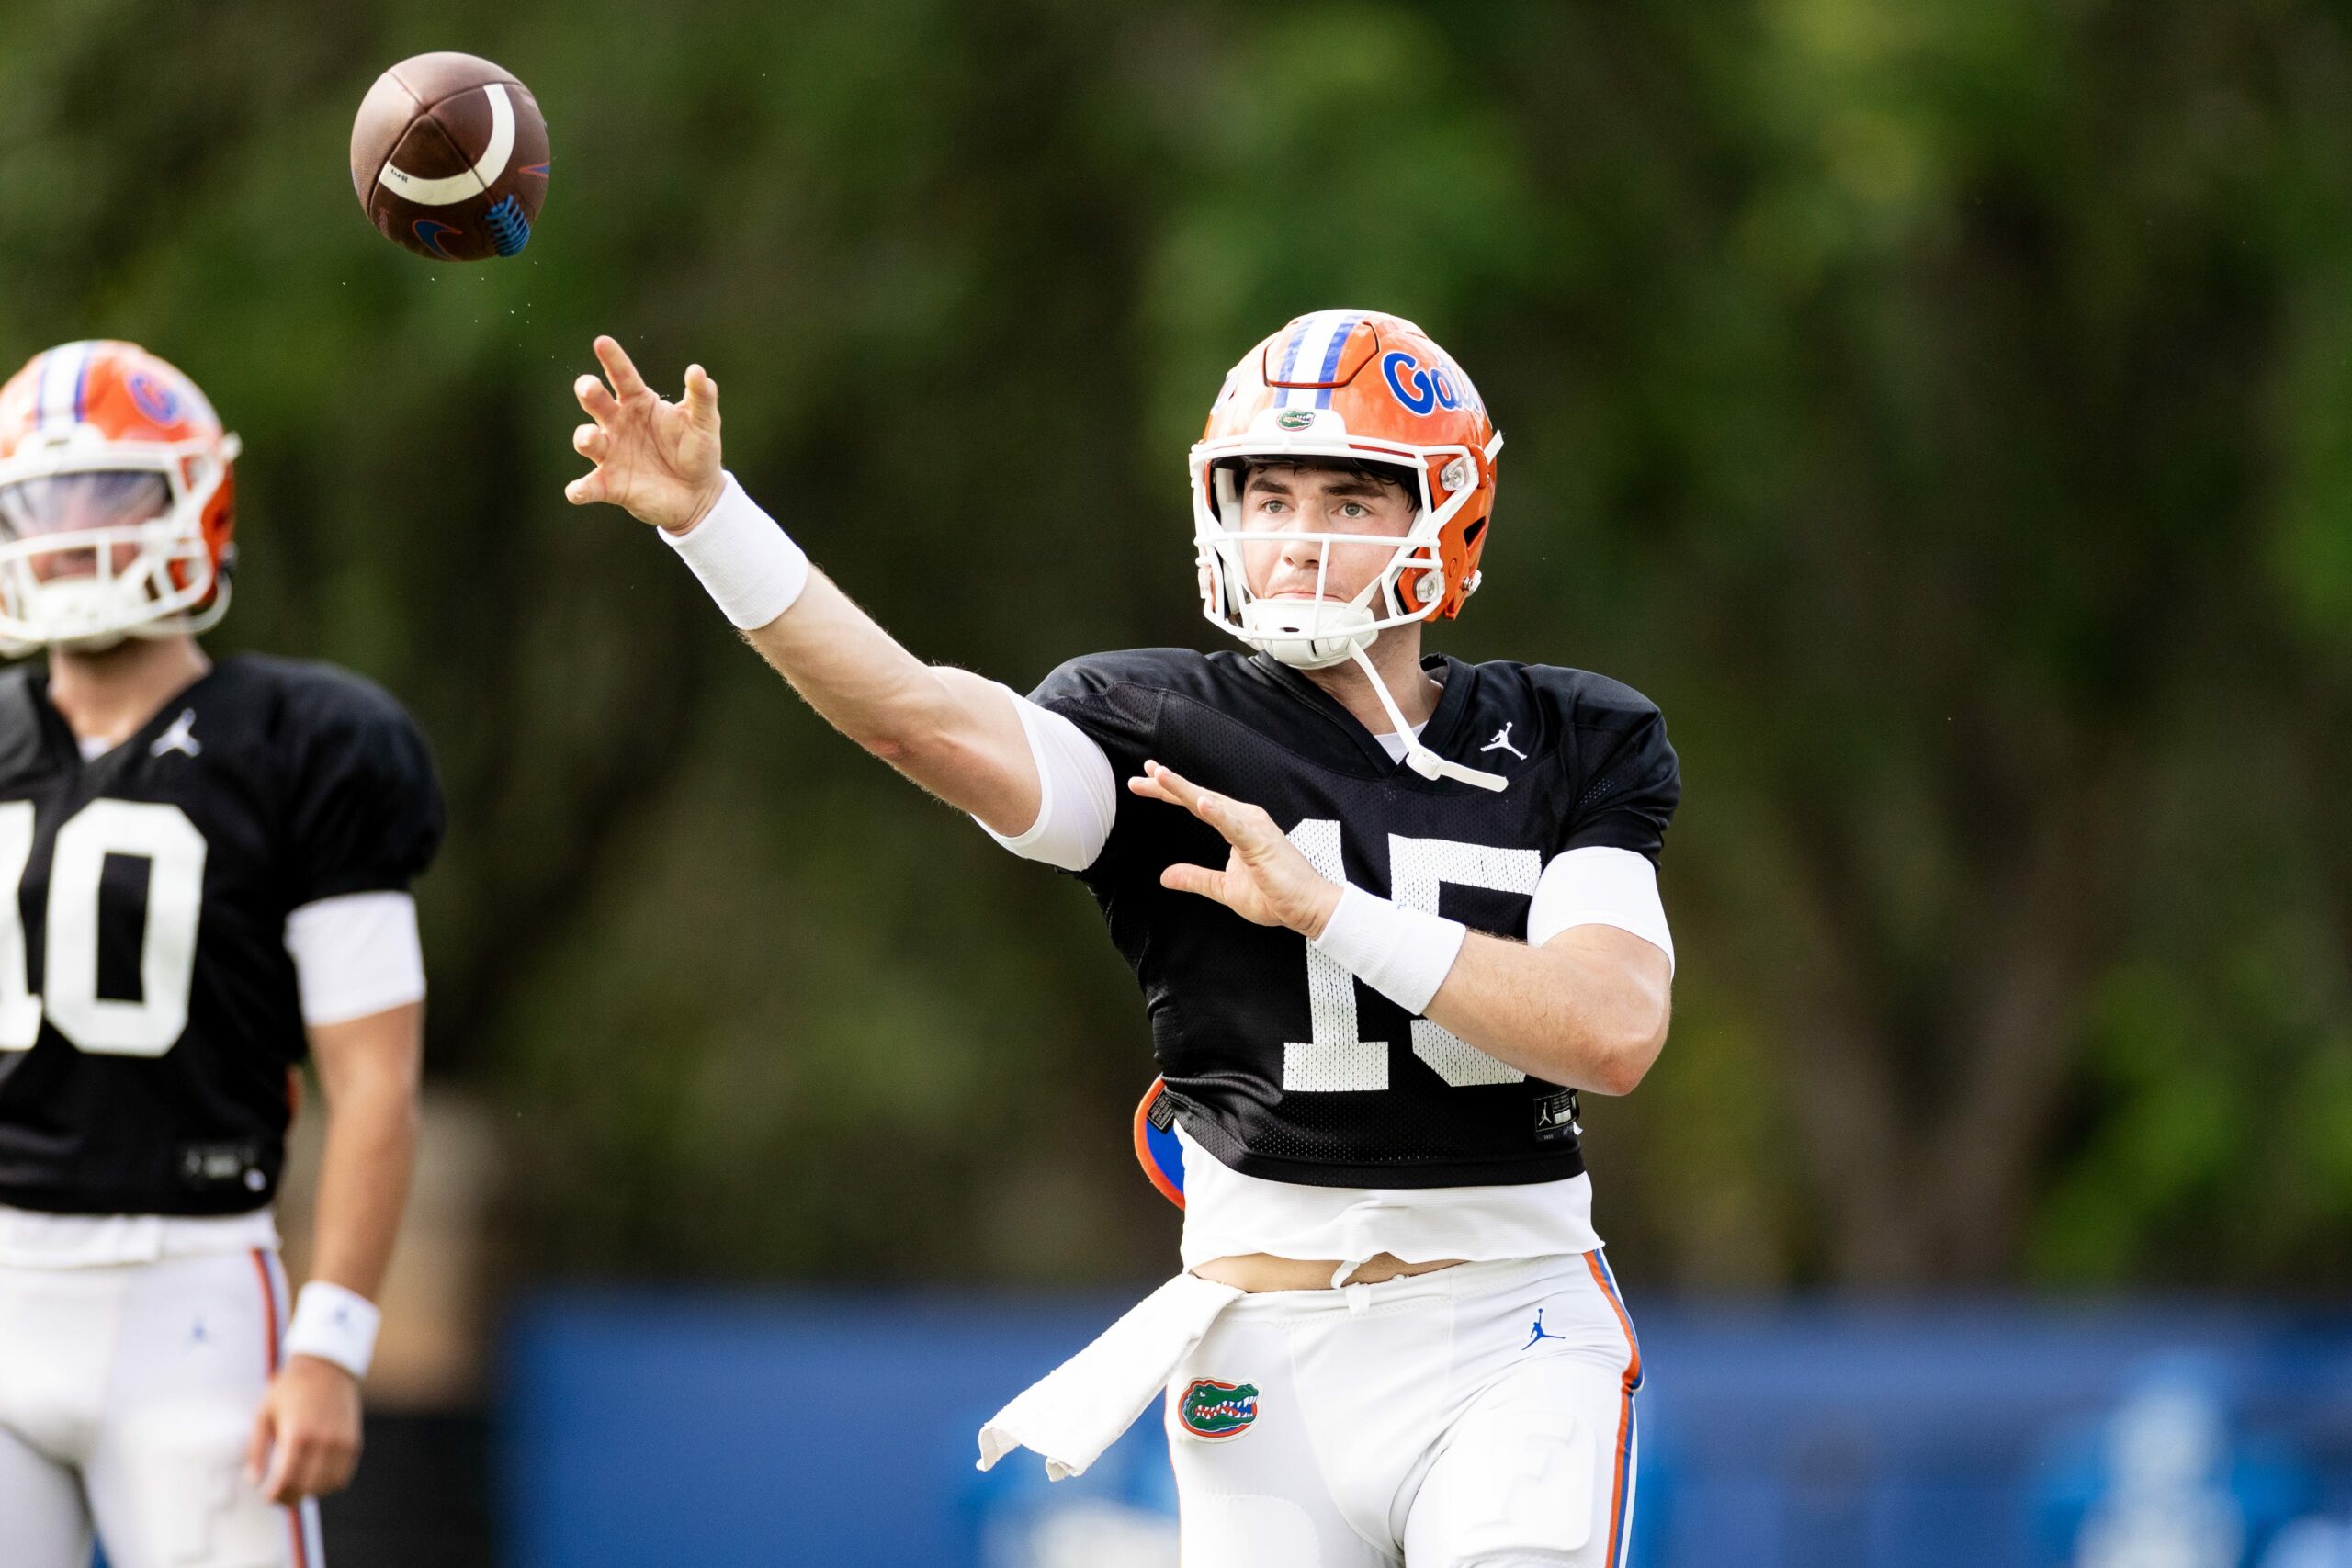 CBS Sports’ one burning question heading into Florida’s spring game